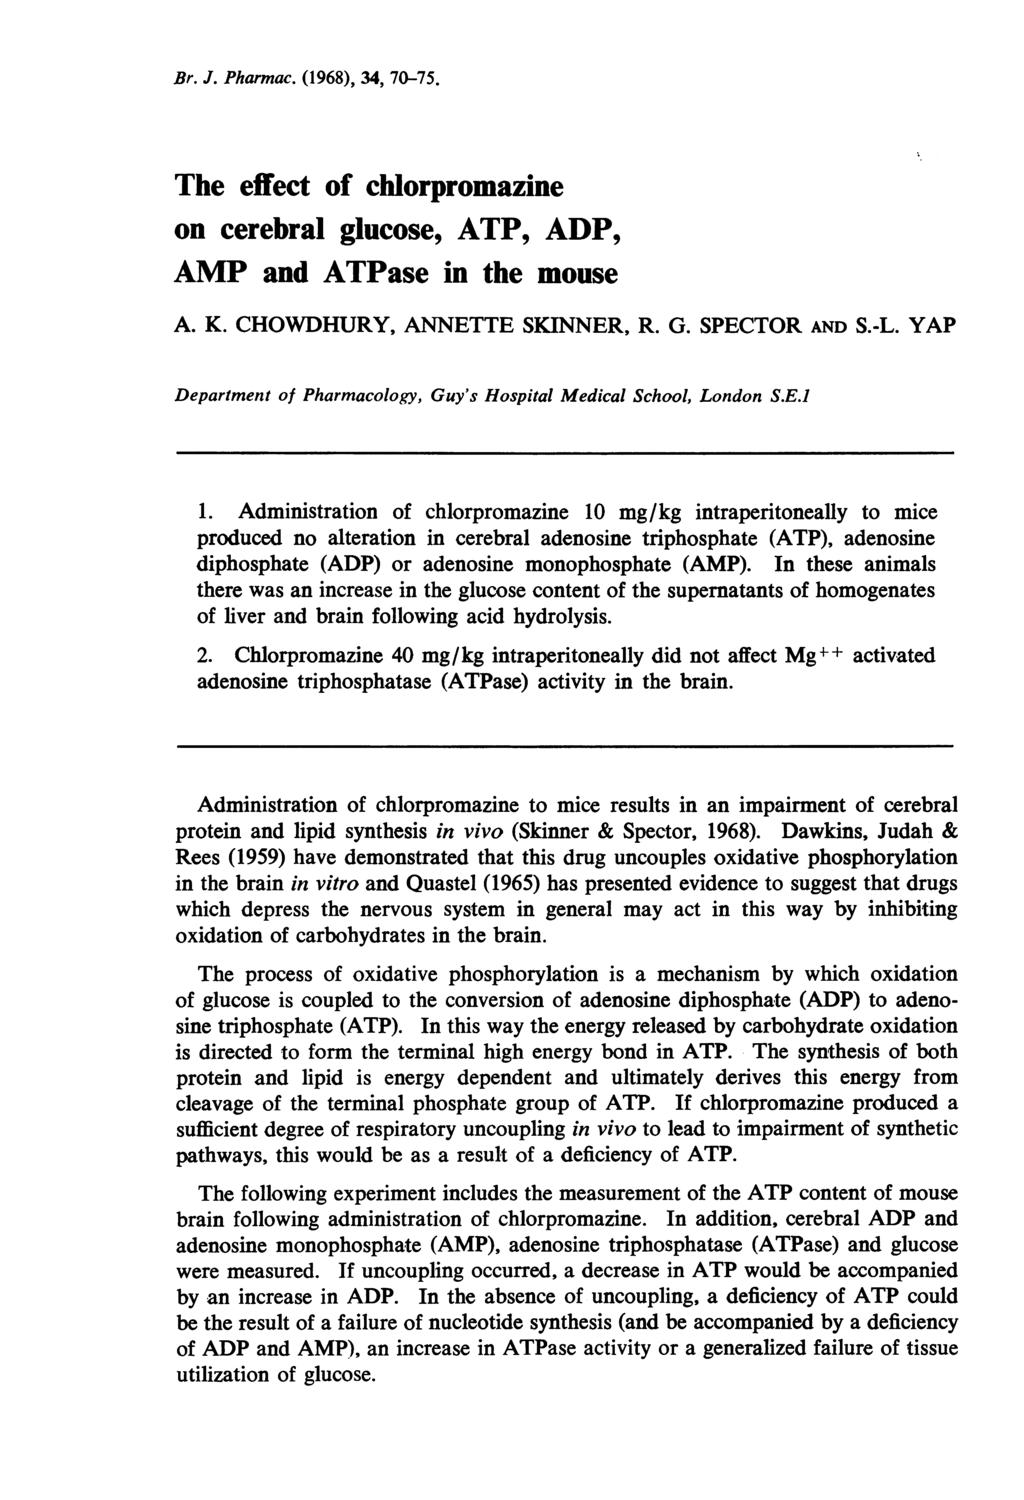 Br. J. Pharmac. (1968), 34, 70-75. The effect of chlorpromazine on cerebral glucose, ATP, ADP, AMP and ATPase in the mouse A. K. CHOWDHURY, ANNETTE SKINNER, R. G. SPECTOR AND S.-L.